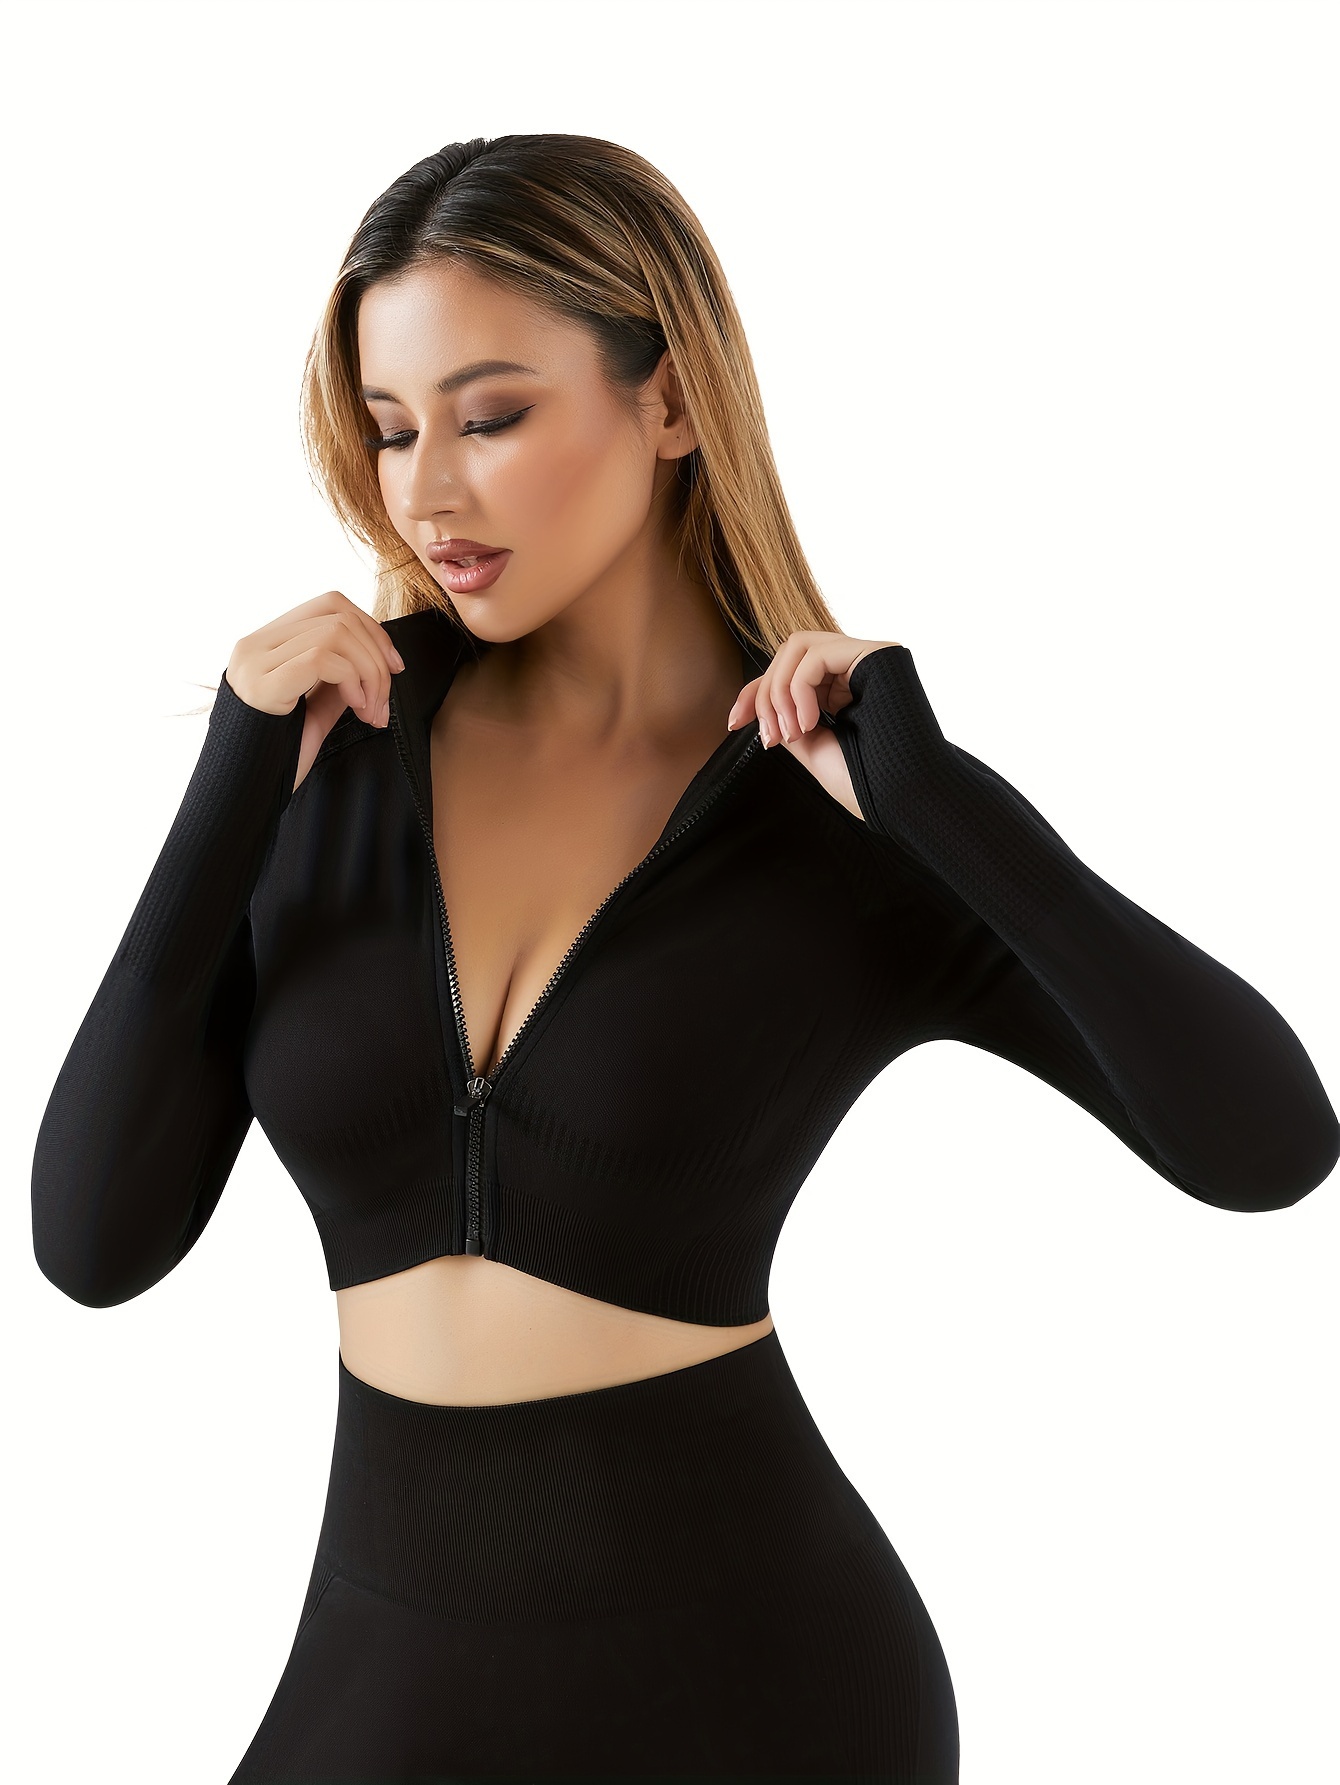 Womens Active Crop Top Gym Casual Jackets For Women With Thumb Holes And  Full Zip Up For Fitness, Yoga, And Exercise From Sigmundosa, $22.67